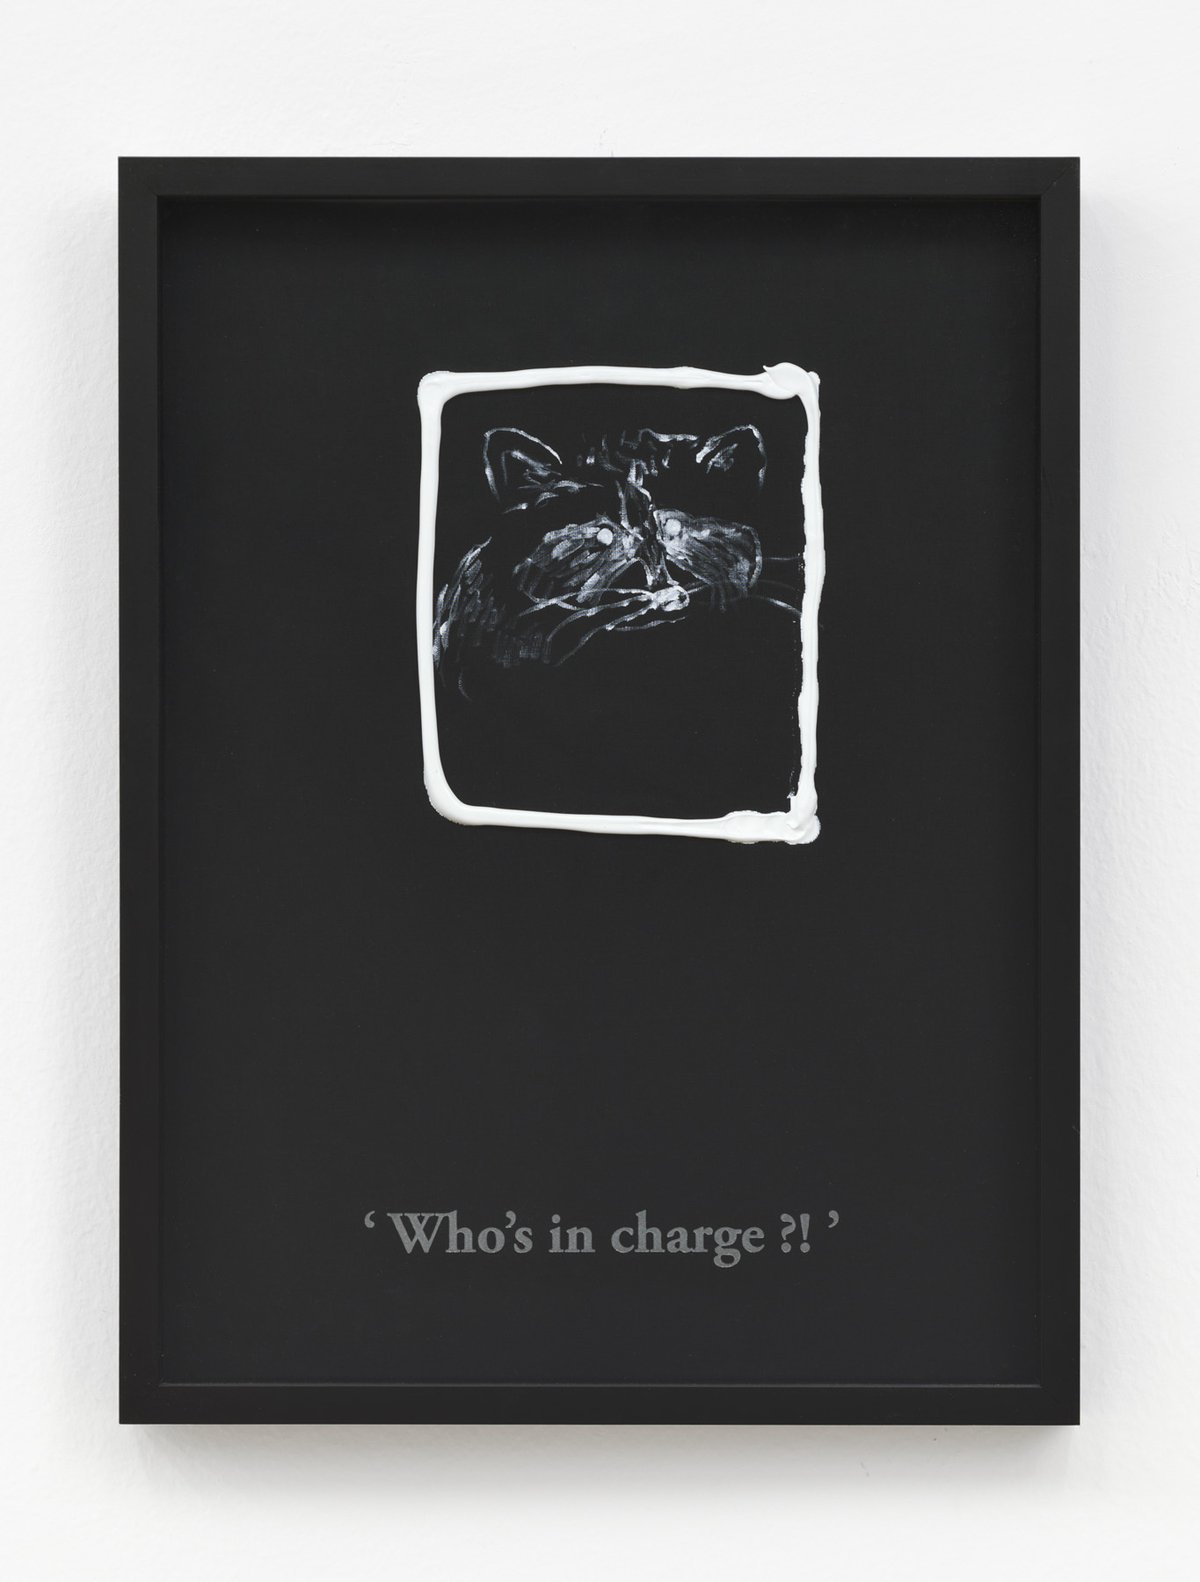 Philipp Timischl&quot;Who&#x27;s in charge?!&quot; (Black/Titanium White), 2017Acrylic on linen and glass-engraved object frame40.1 x 32.1 cm